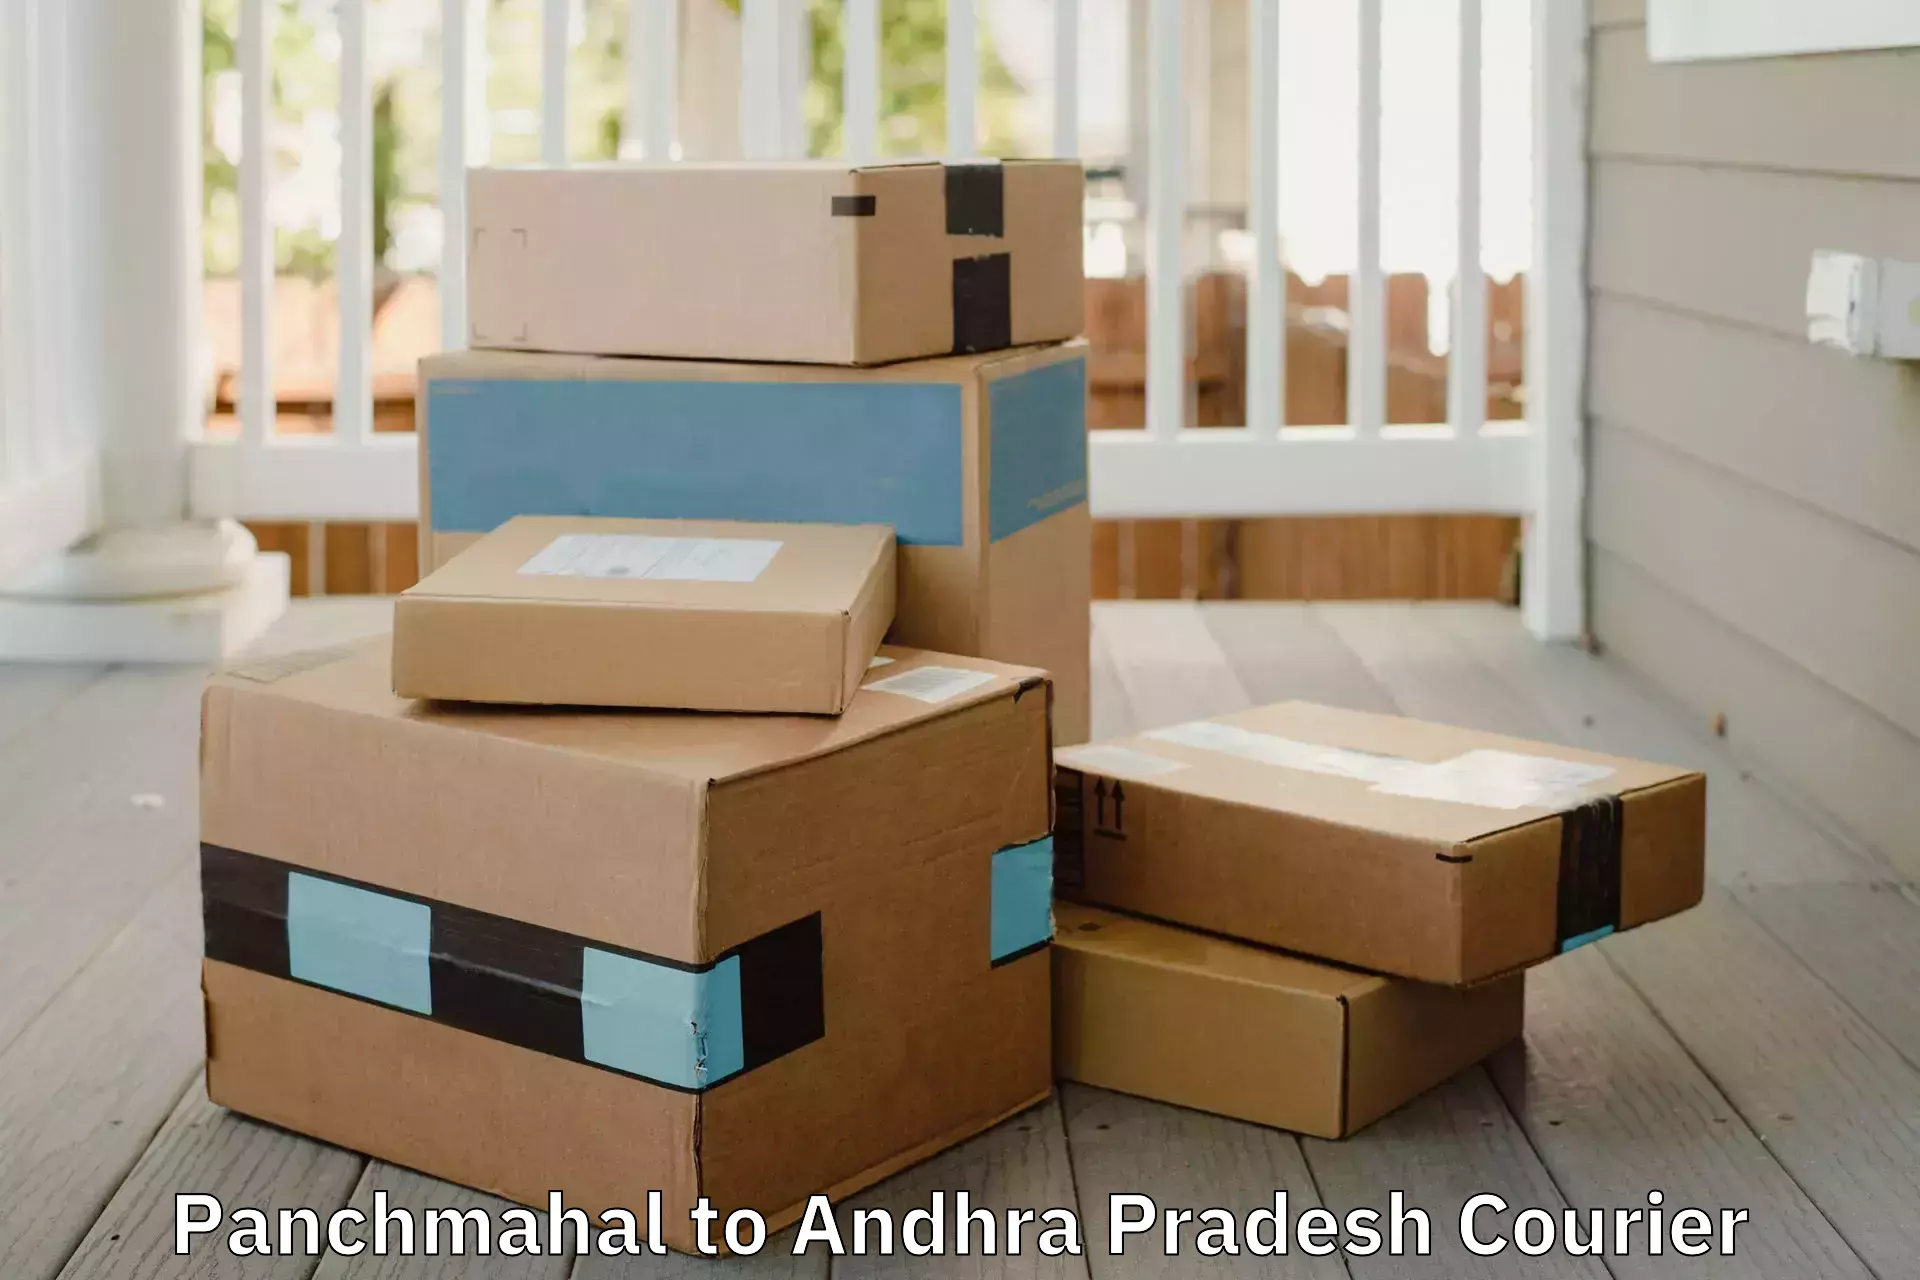 Home relocation experts Panchmahal to Challapalli